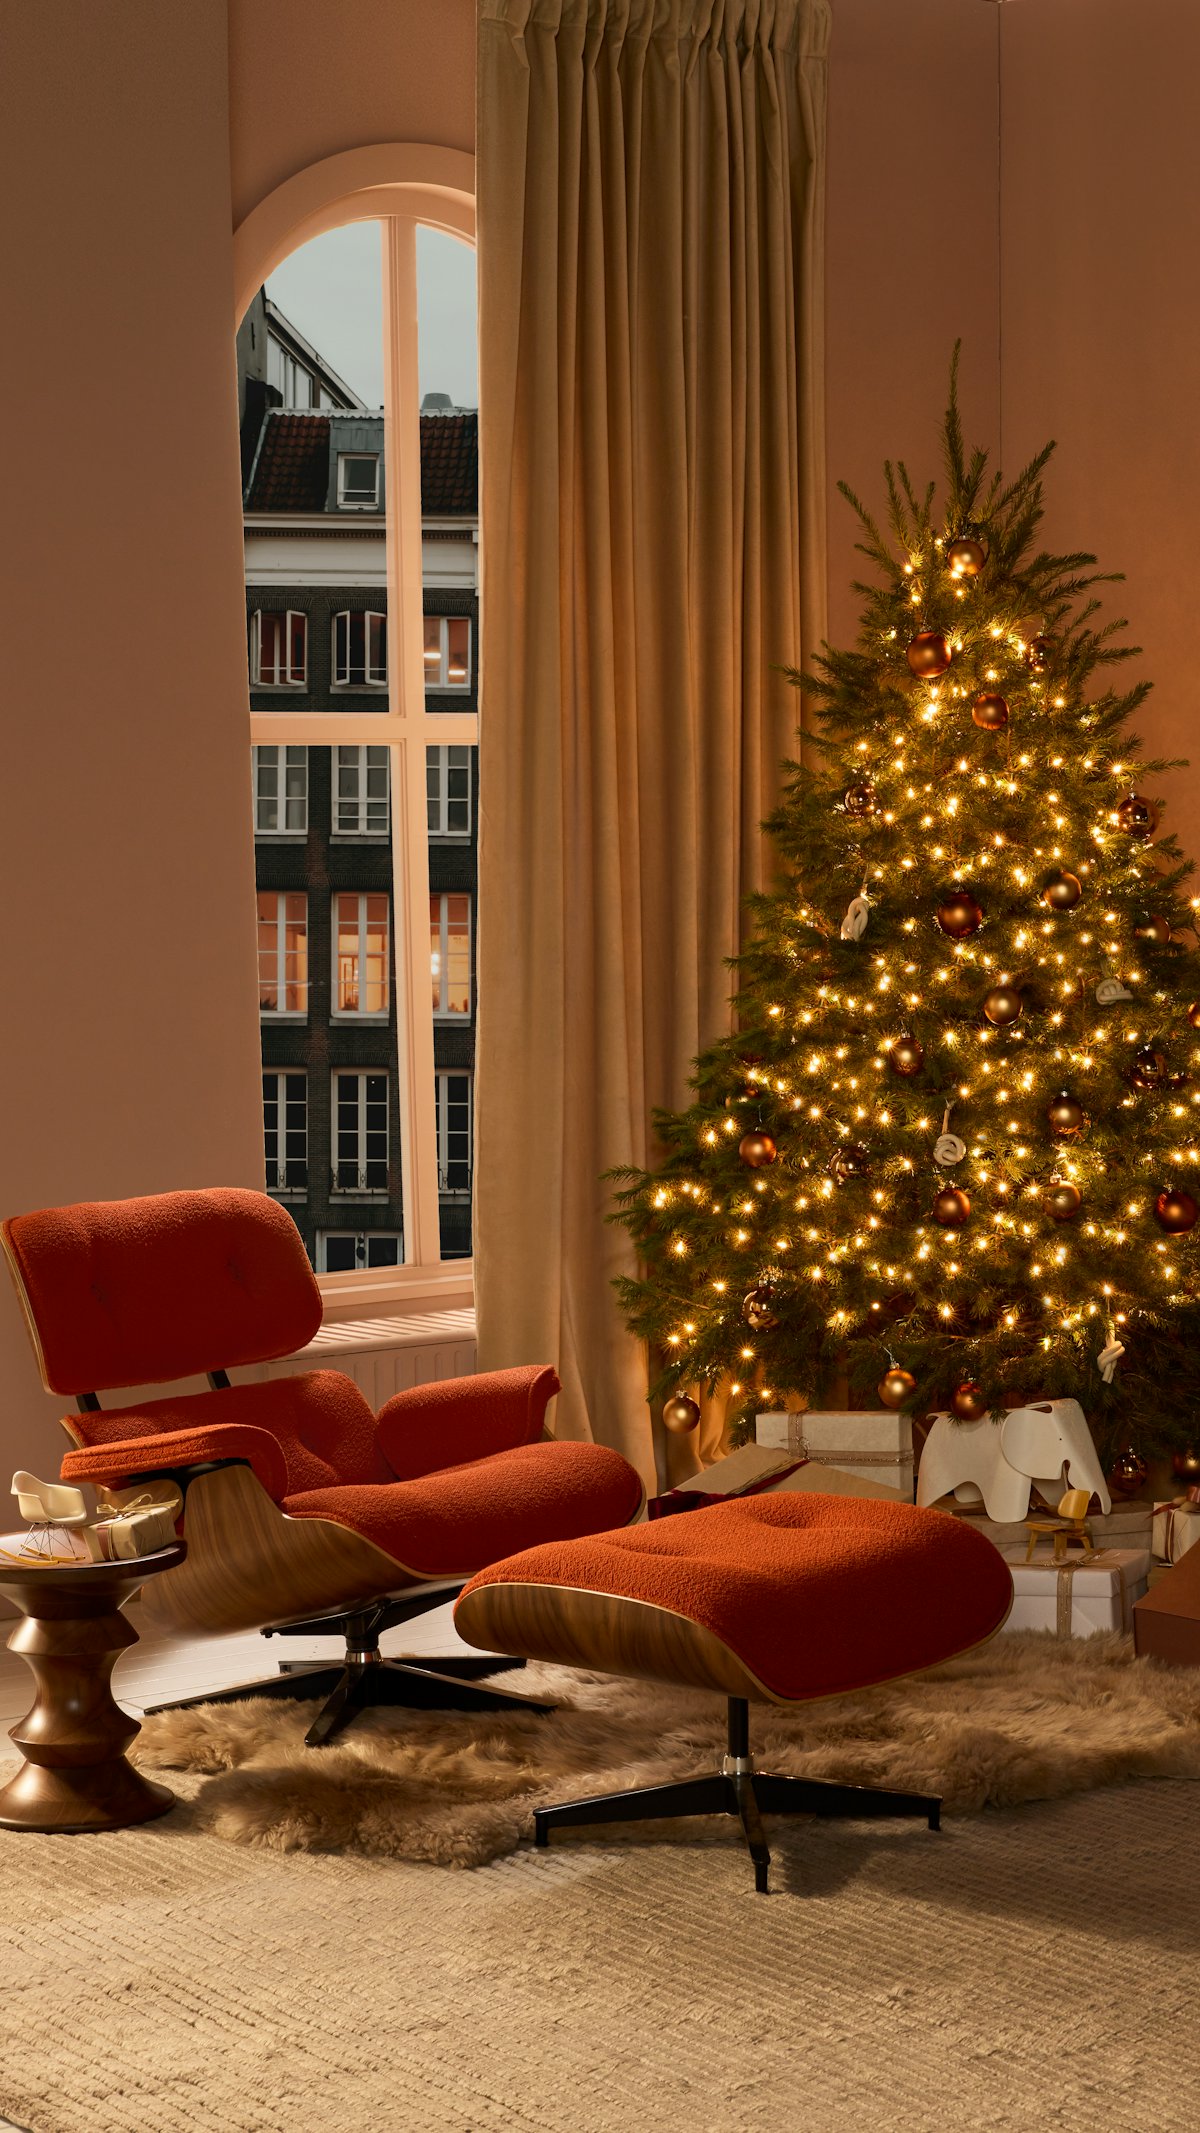 Eames Lounge Chair & Ottoman, Eames Walnut Stool and Sheepskin Throw with Christmas Tree in living room setting